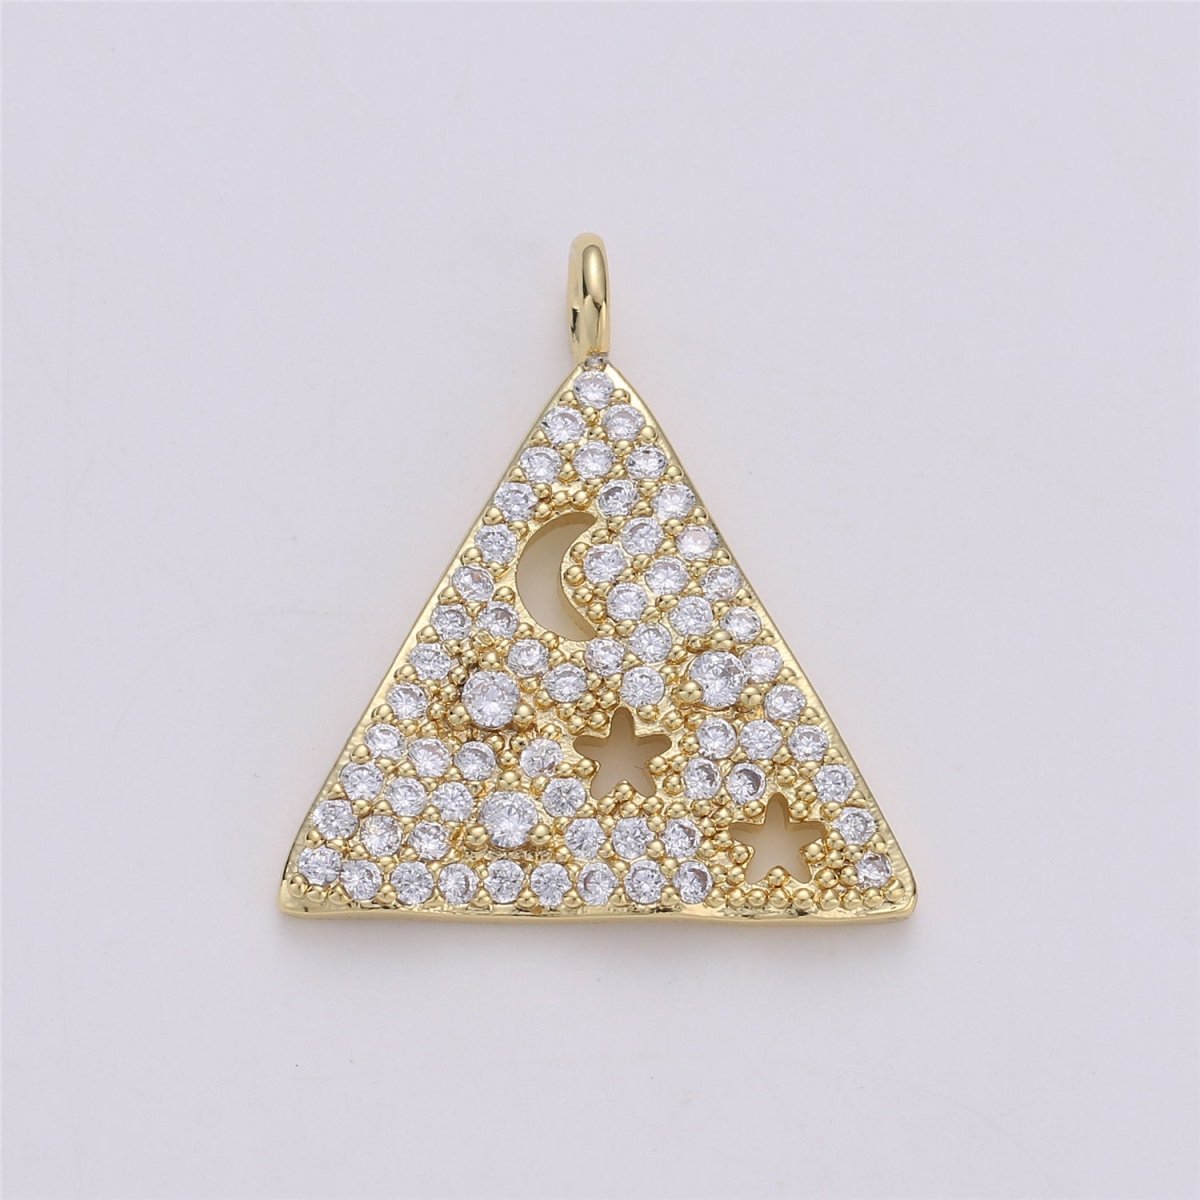 24K Gold Filled Geometric Dainty Triangle Charm with Micro Pave Moon and Star Cubic Zirconia CZ Stone for Necklace Bracelet Component, C-872 - DLUXCA